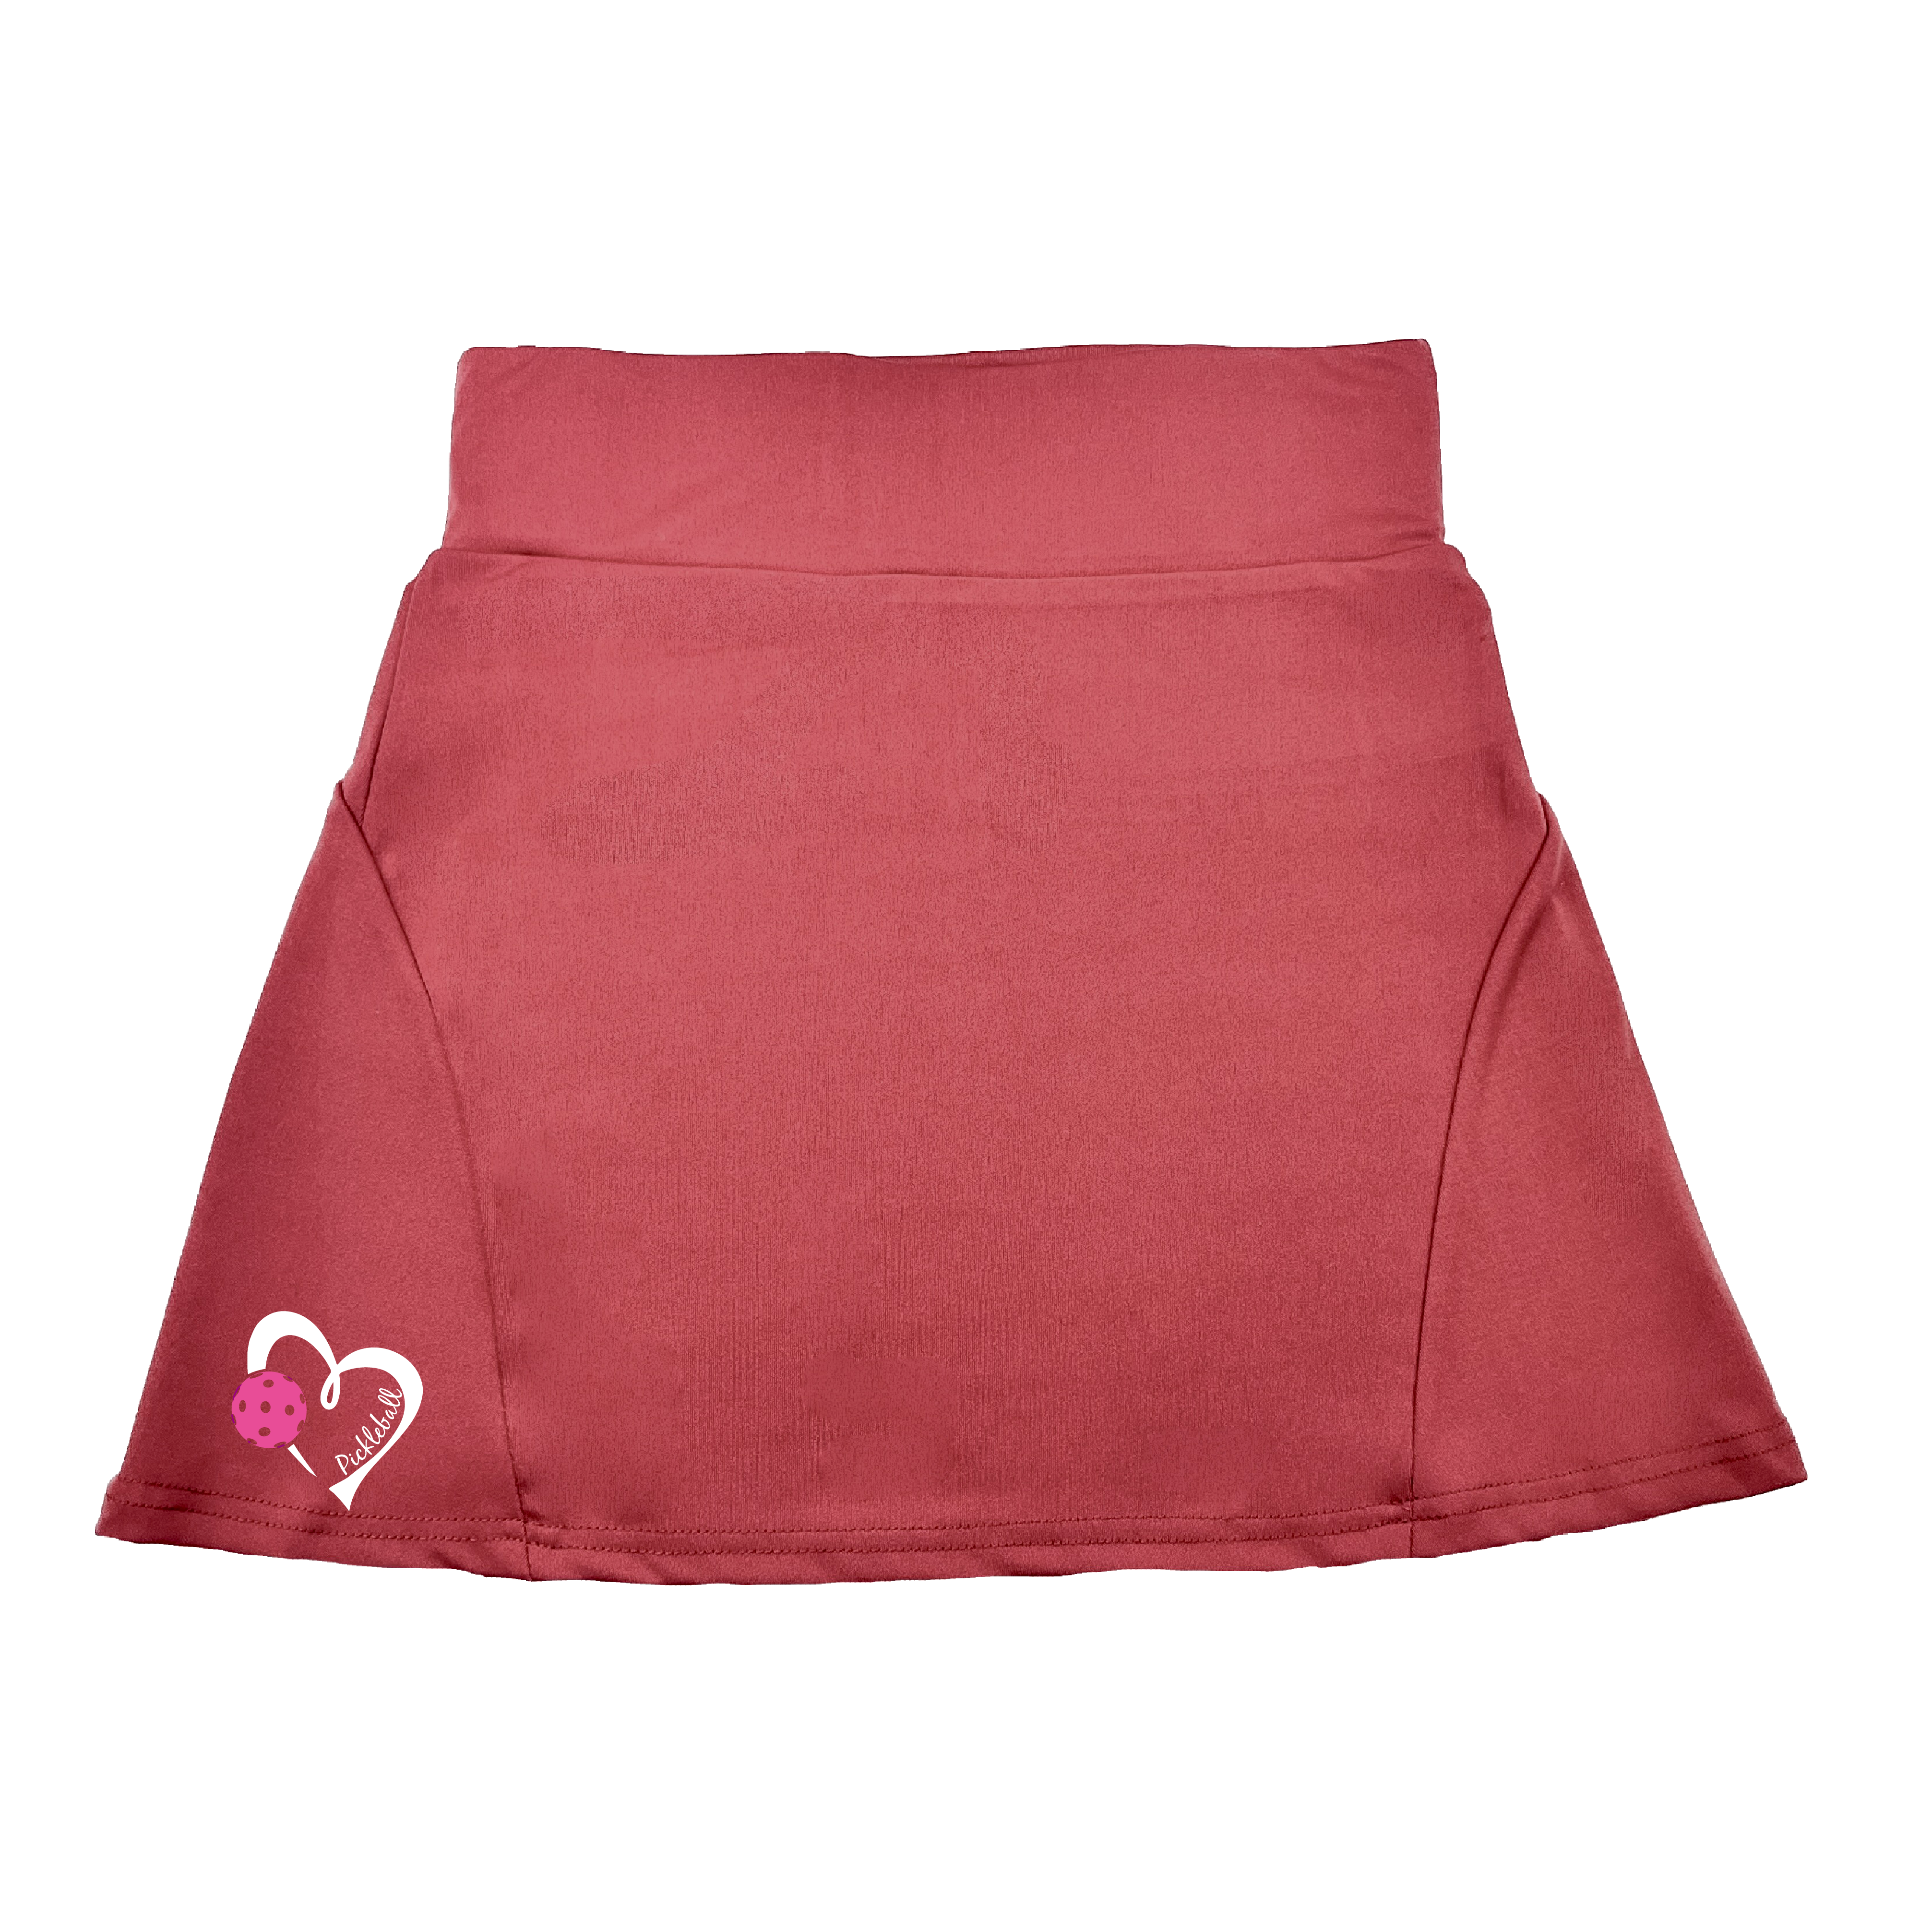 Pickleball Flirty Skort Design:  Pickleball Love with Heart - Pink  These flirty skorts have a flat mid-rise waistband with a 3 inch waistband.  Light weight without being see through and the material wicks away moisture quickly.  Flirty pleats in the back with inner shorts for free movement and stylish coverage on the courts.  A functional zipper pocket on the back and two built in pockets on the shorts for convenient storage. 